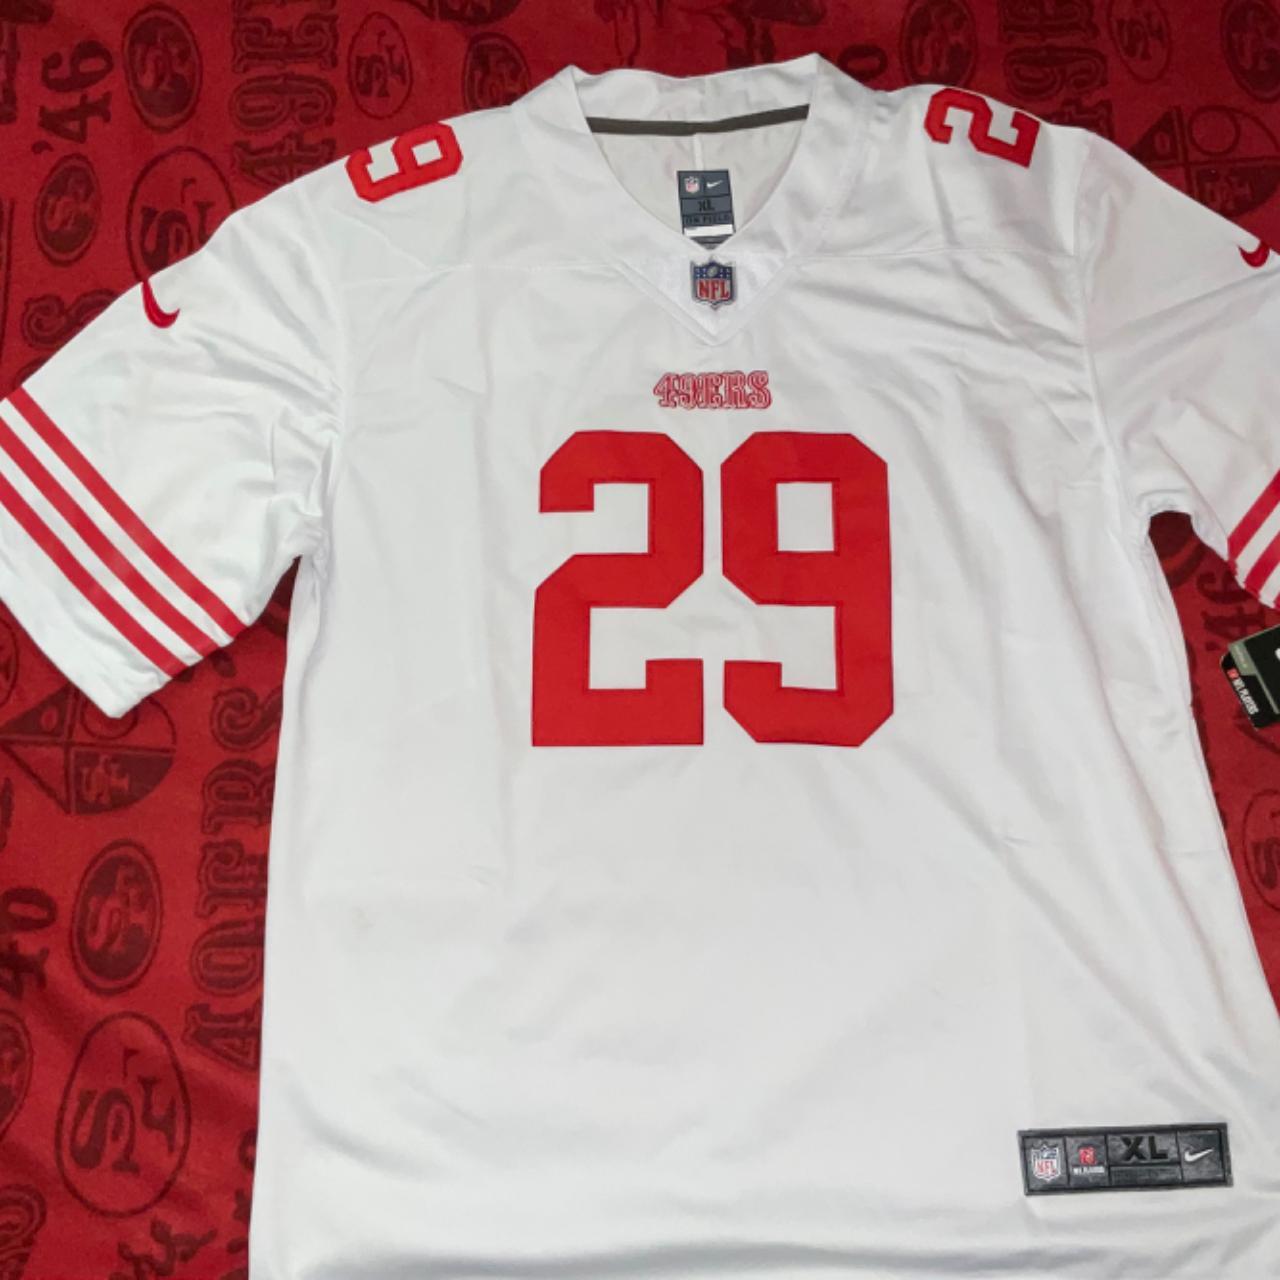 Sanfrancisco49ers Deion Sanders #21 Red jersey 49ers mitchell ness